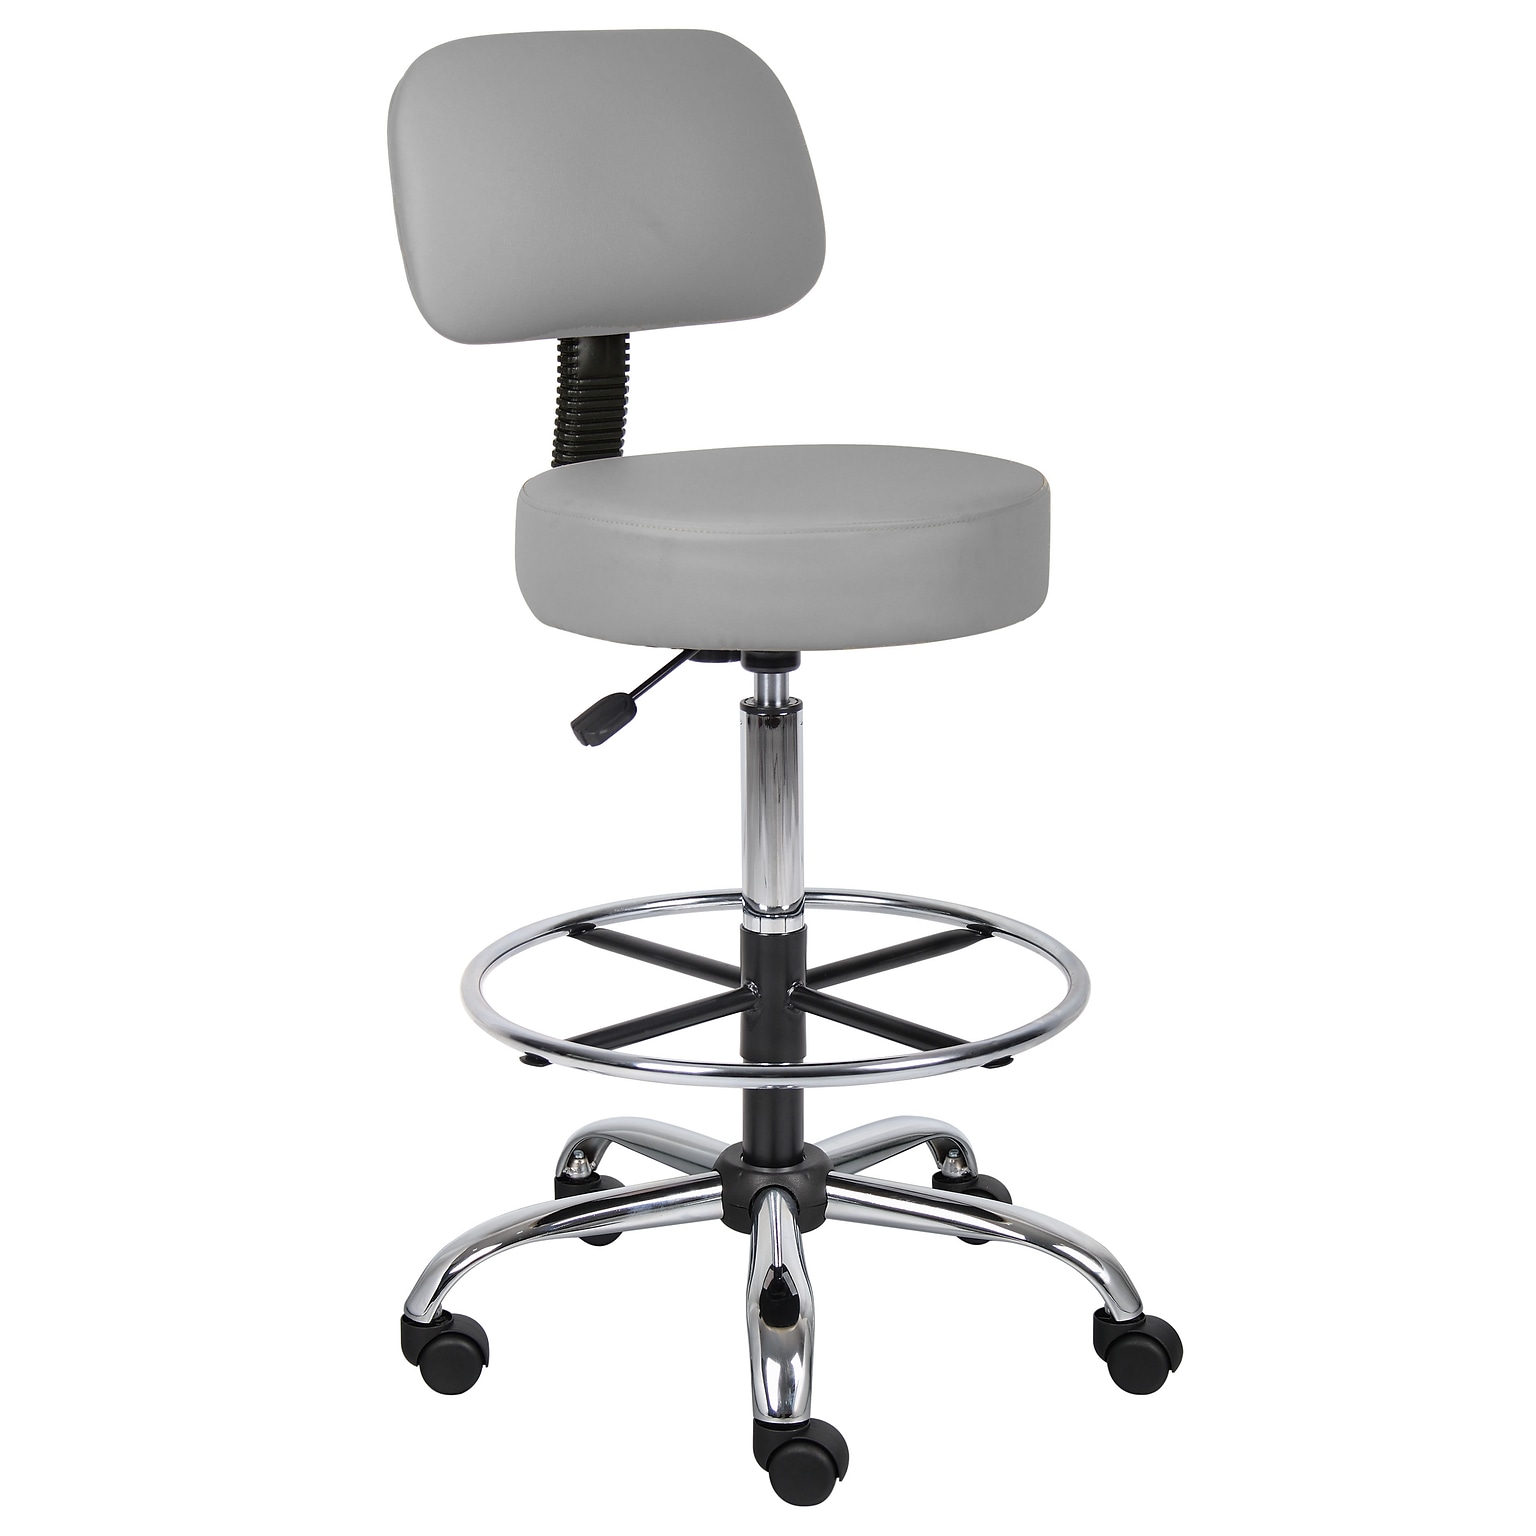 Boss Office Products Caressoft Medical/Drafting Stool w/ Back Cushion (B16245GY)